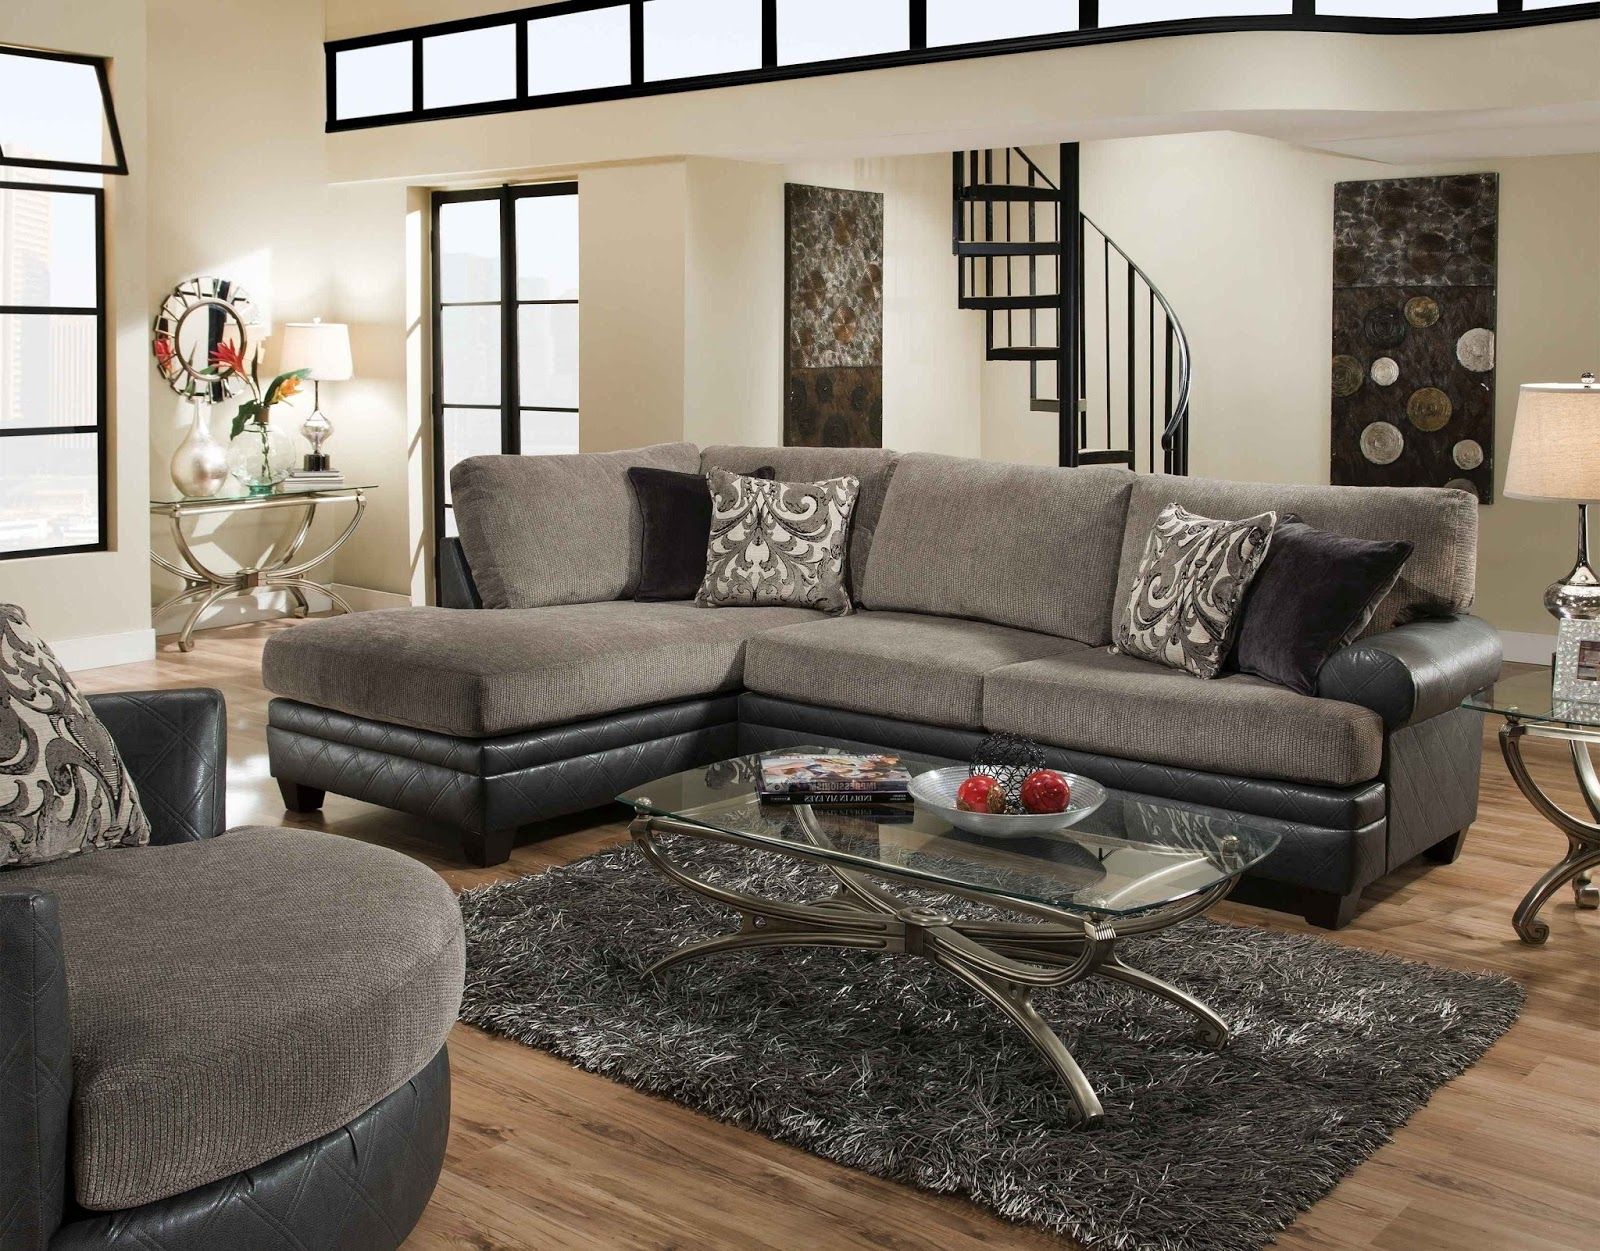 Albany Industries Sectional Sofa Interior Design In Albany Industries Sectional Sofa (View 7 of 12)